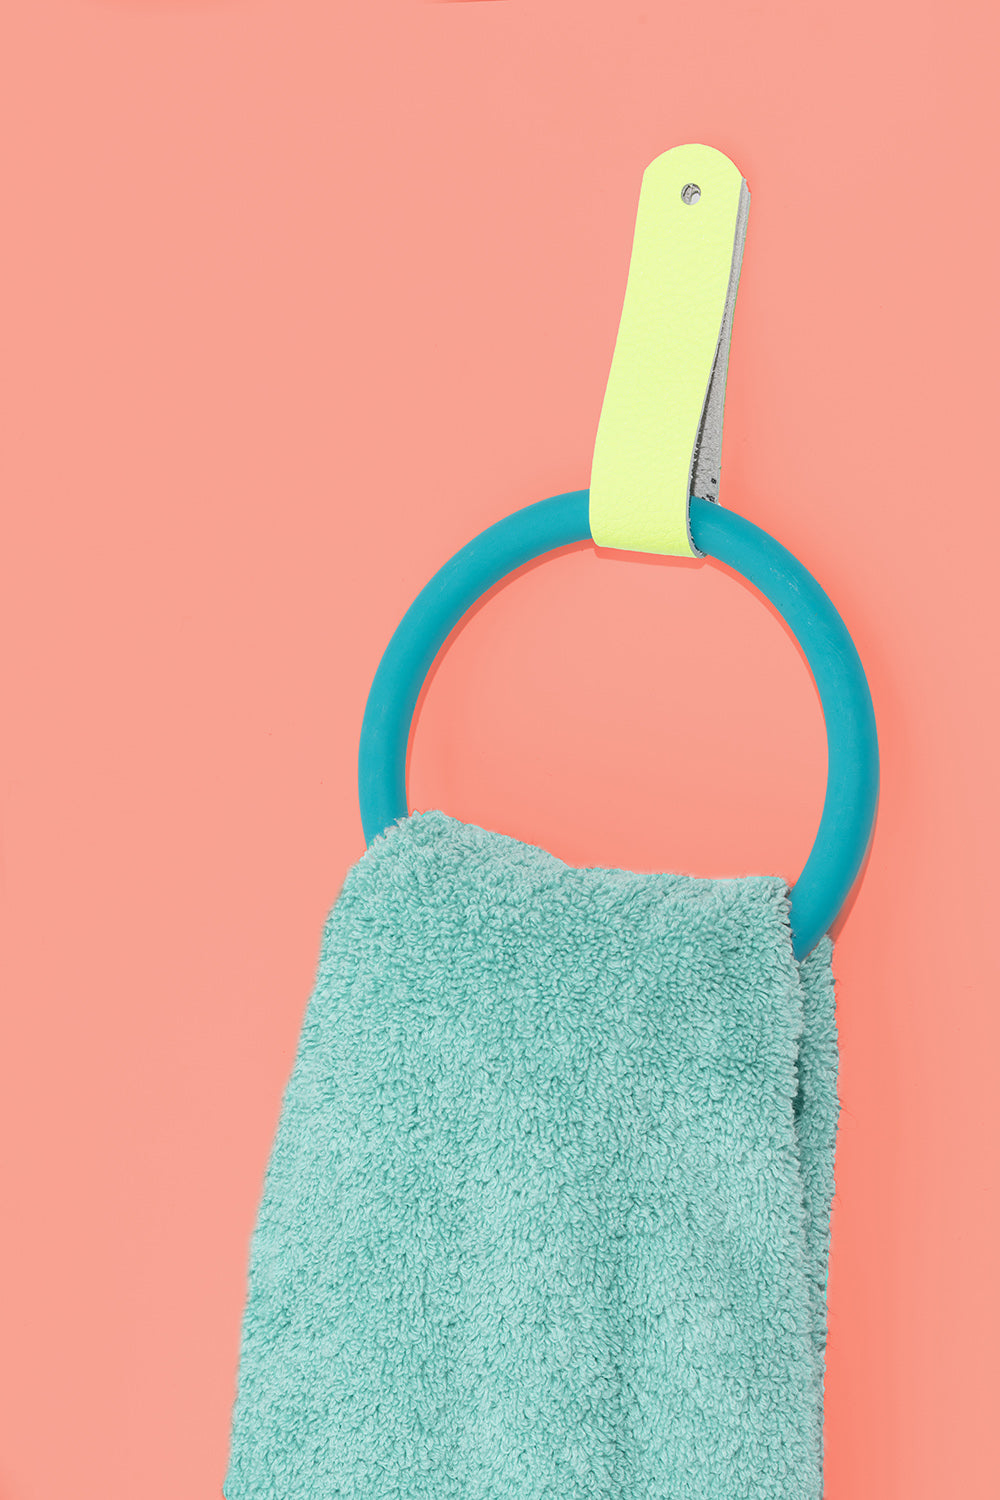 Towel Ring & Leather Strap - Teal Block Colour - Misshandled